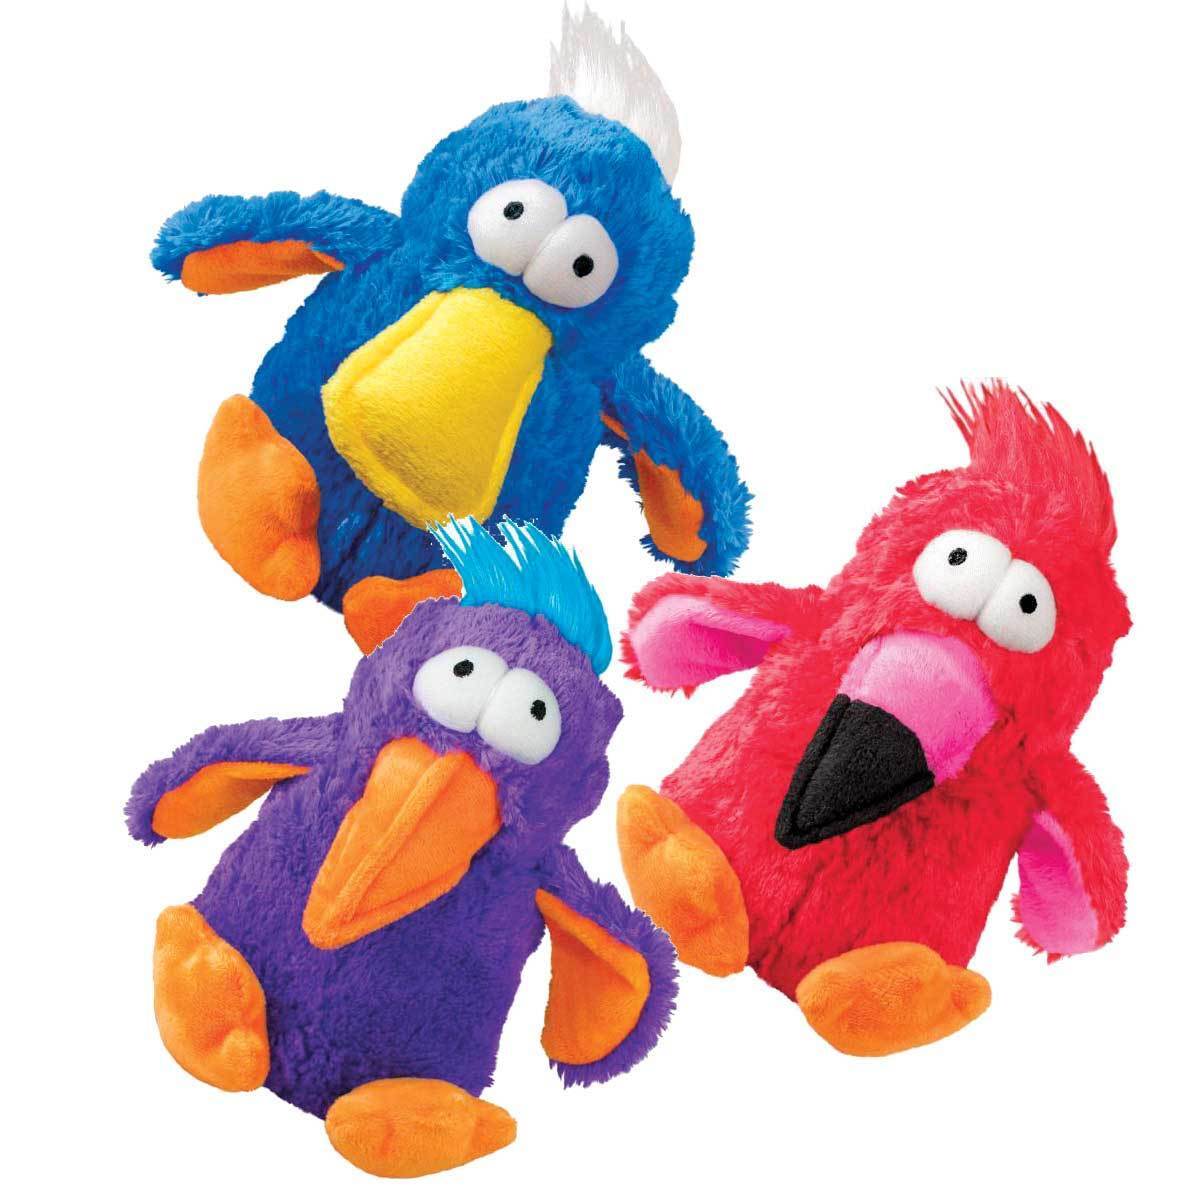 KONG Dodo Plush Squeaker Dog Toy in Assorted Colours - 3 Unit/s image 0